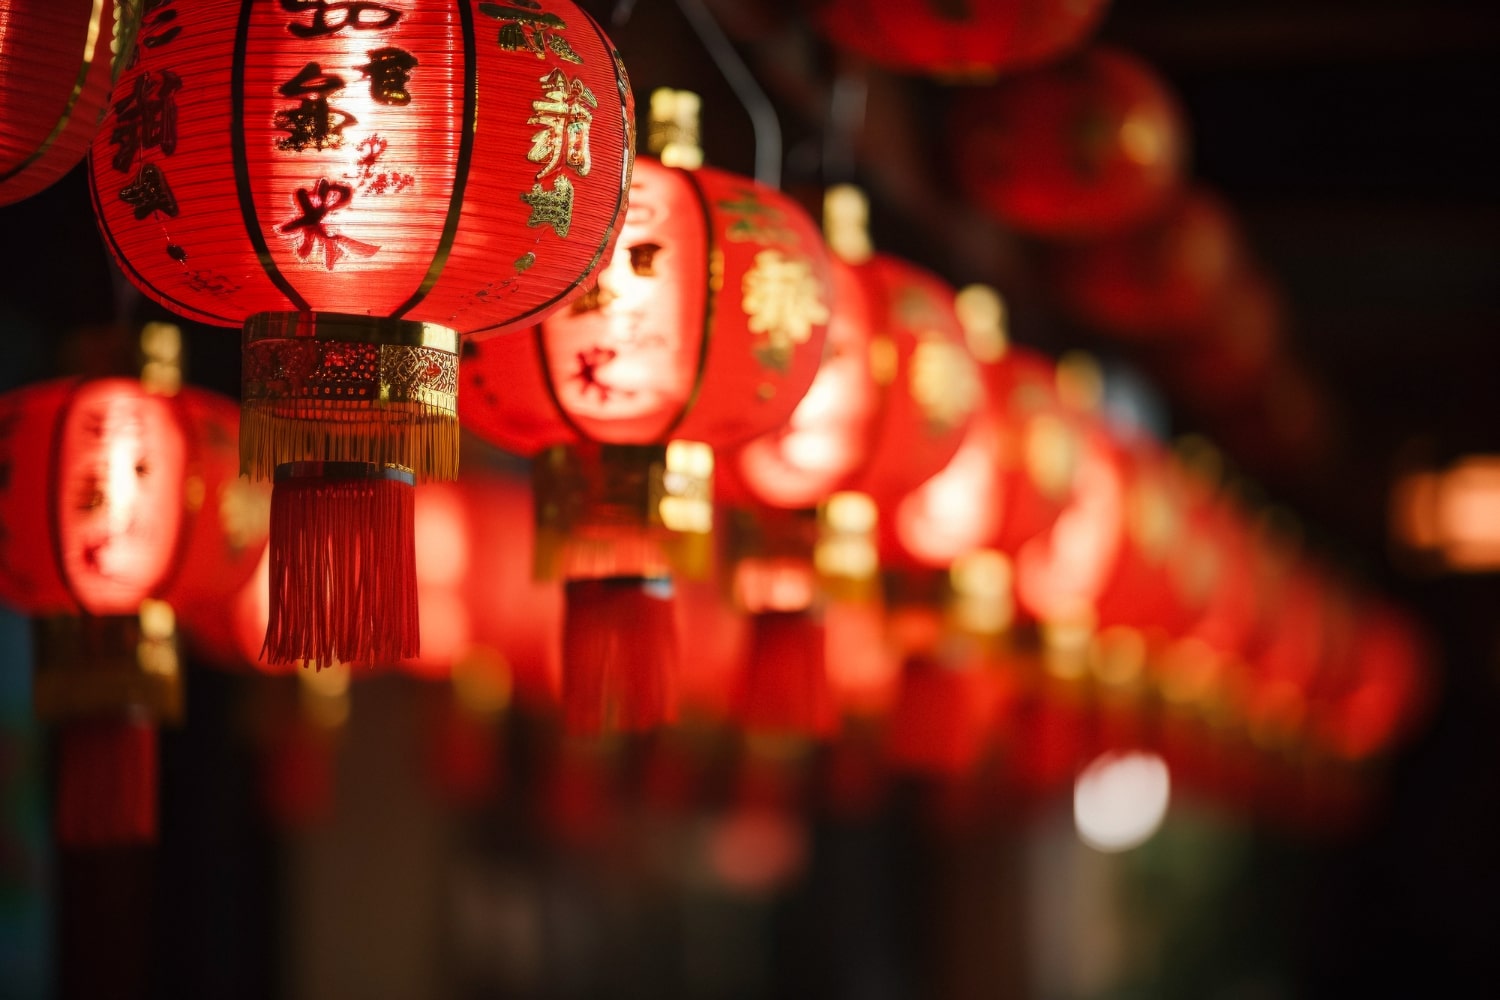 Chinese New Year gifts—customized lanterns bring a personal touch to celebrations.